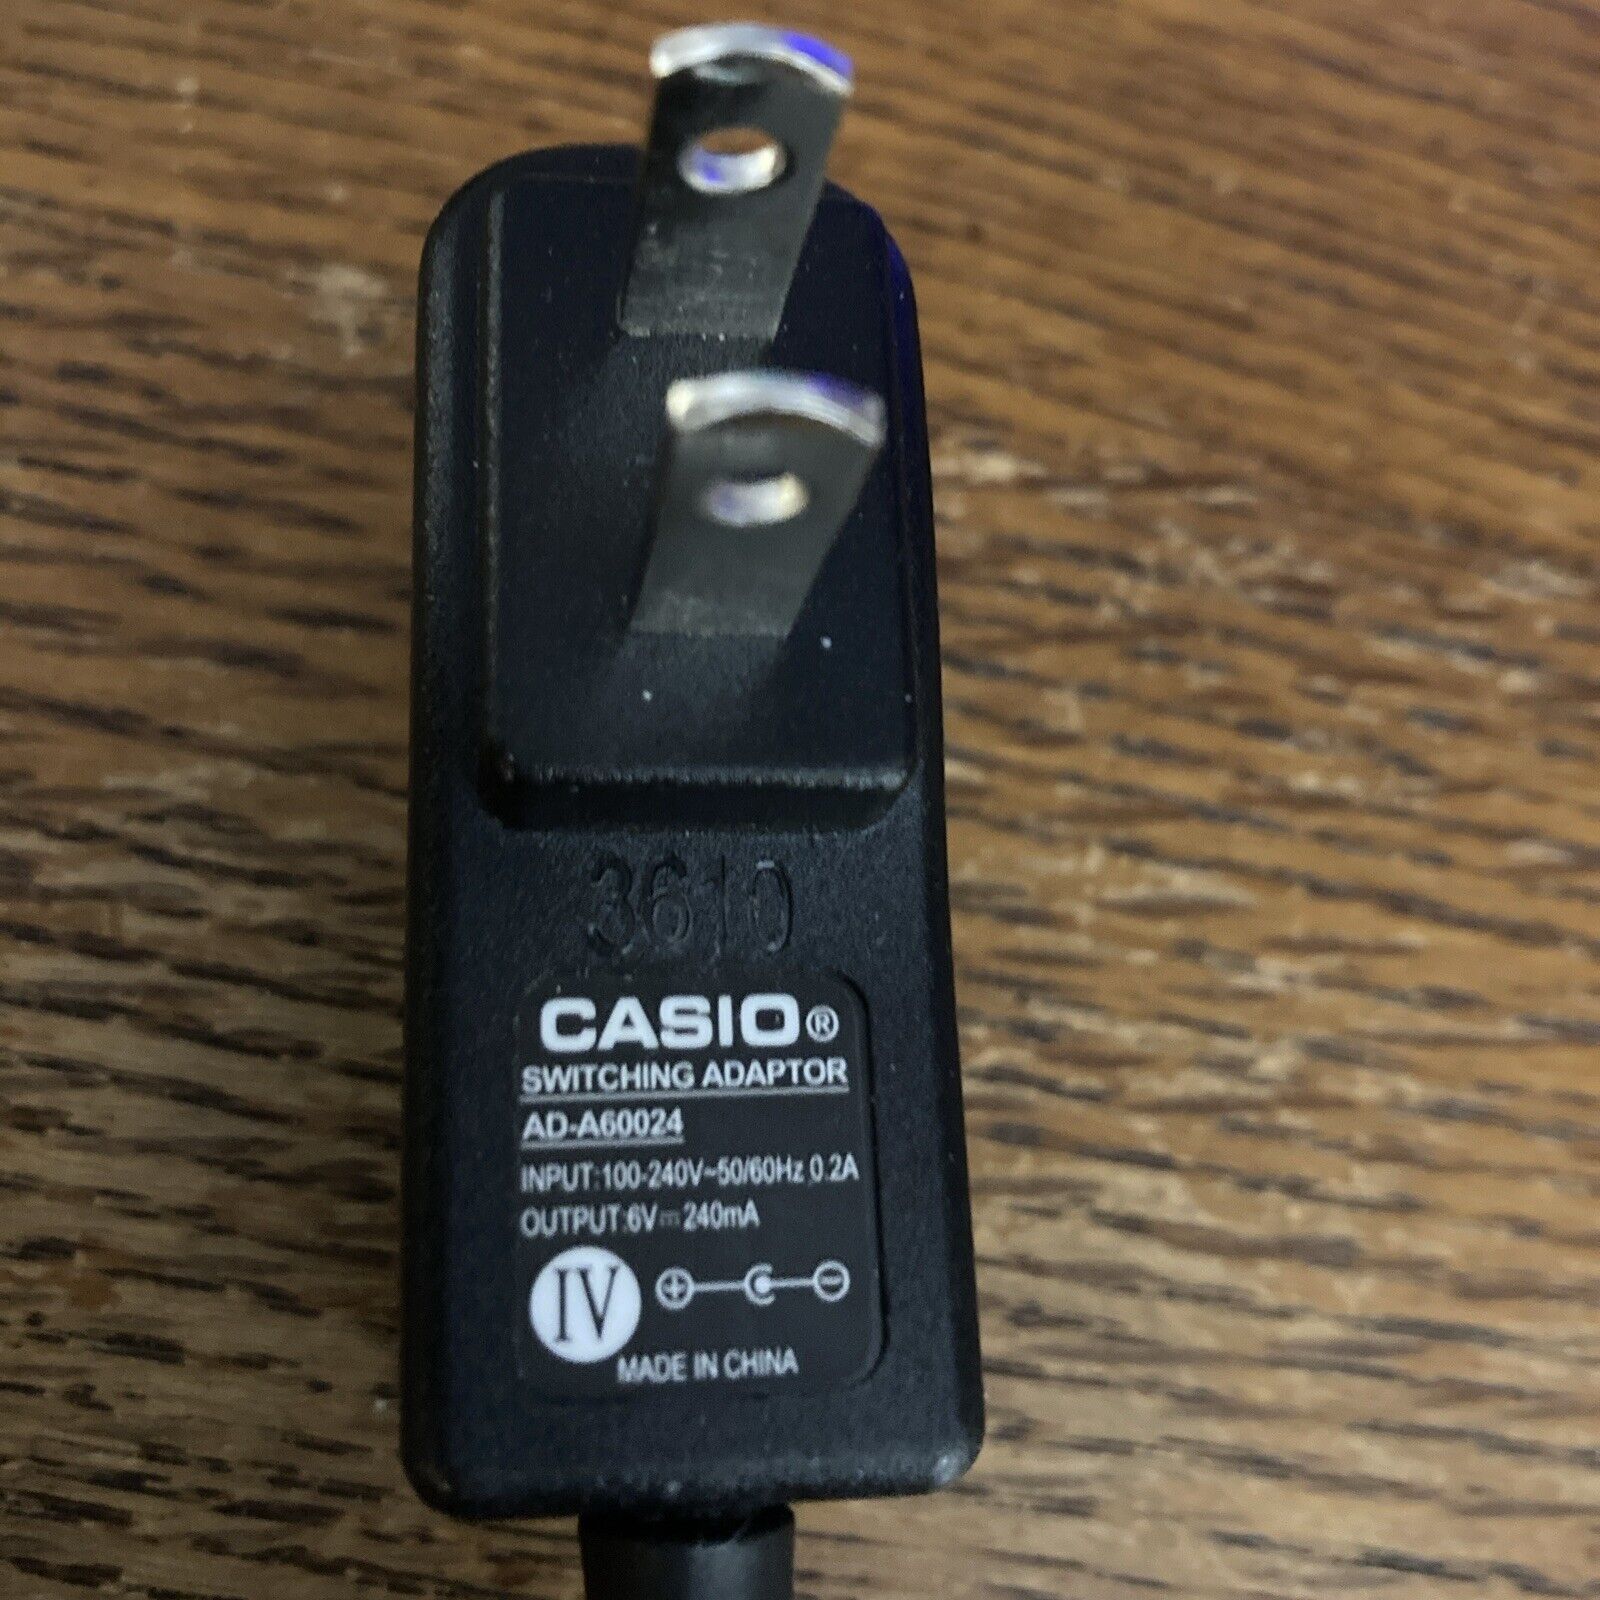 *Brand NEW*Genuine CASIO Switching Adapter - Model AD-A60024 - Output 6V 240mA AC ADAPTER Power Supp